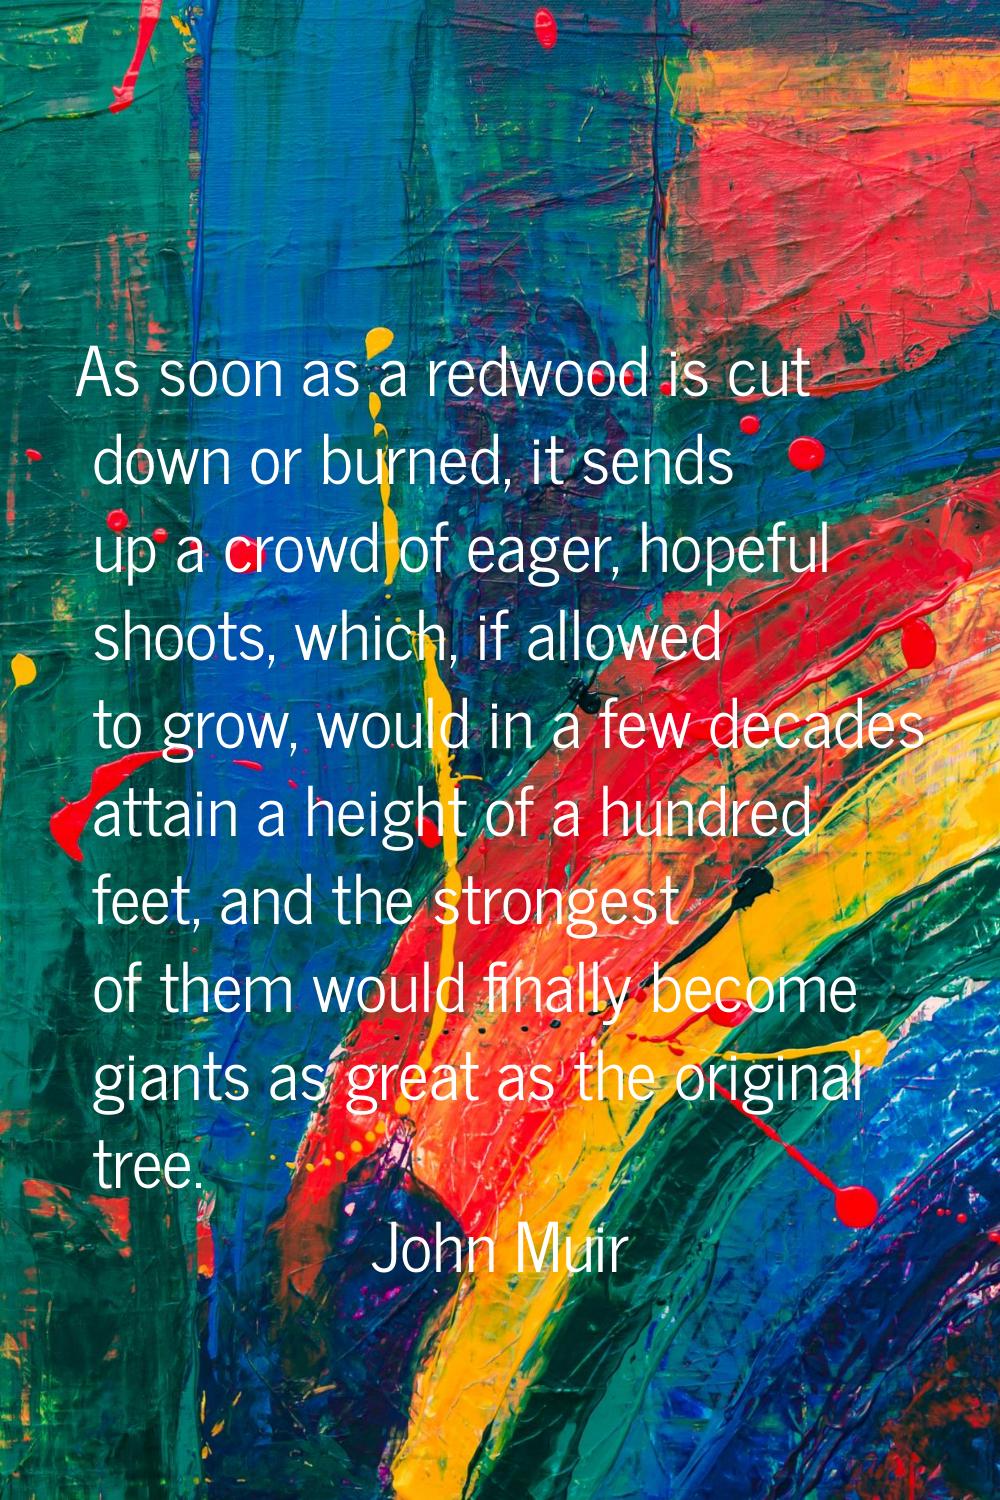 As soon as a redwood is cut down or burned, it sends up a crowd of eager, hopeful shoots, which, if